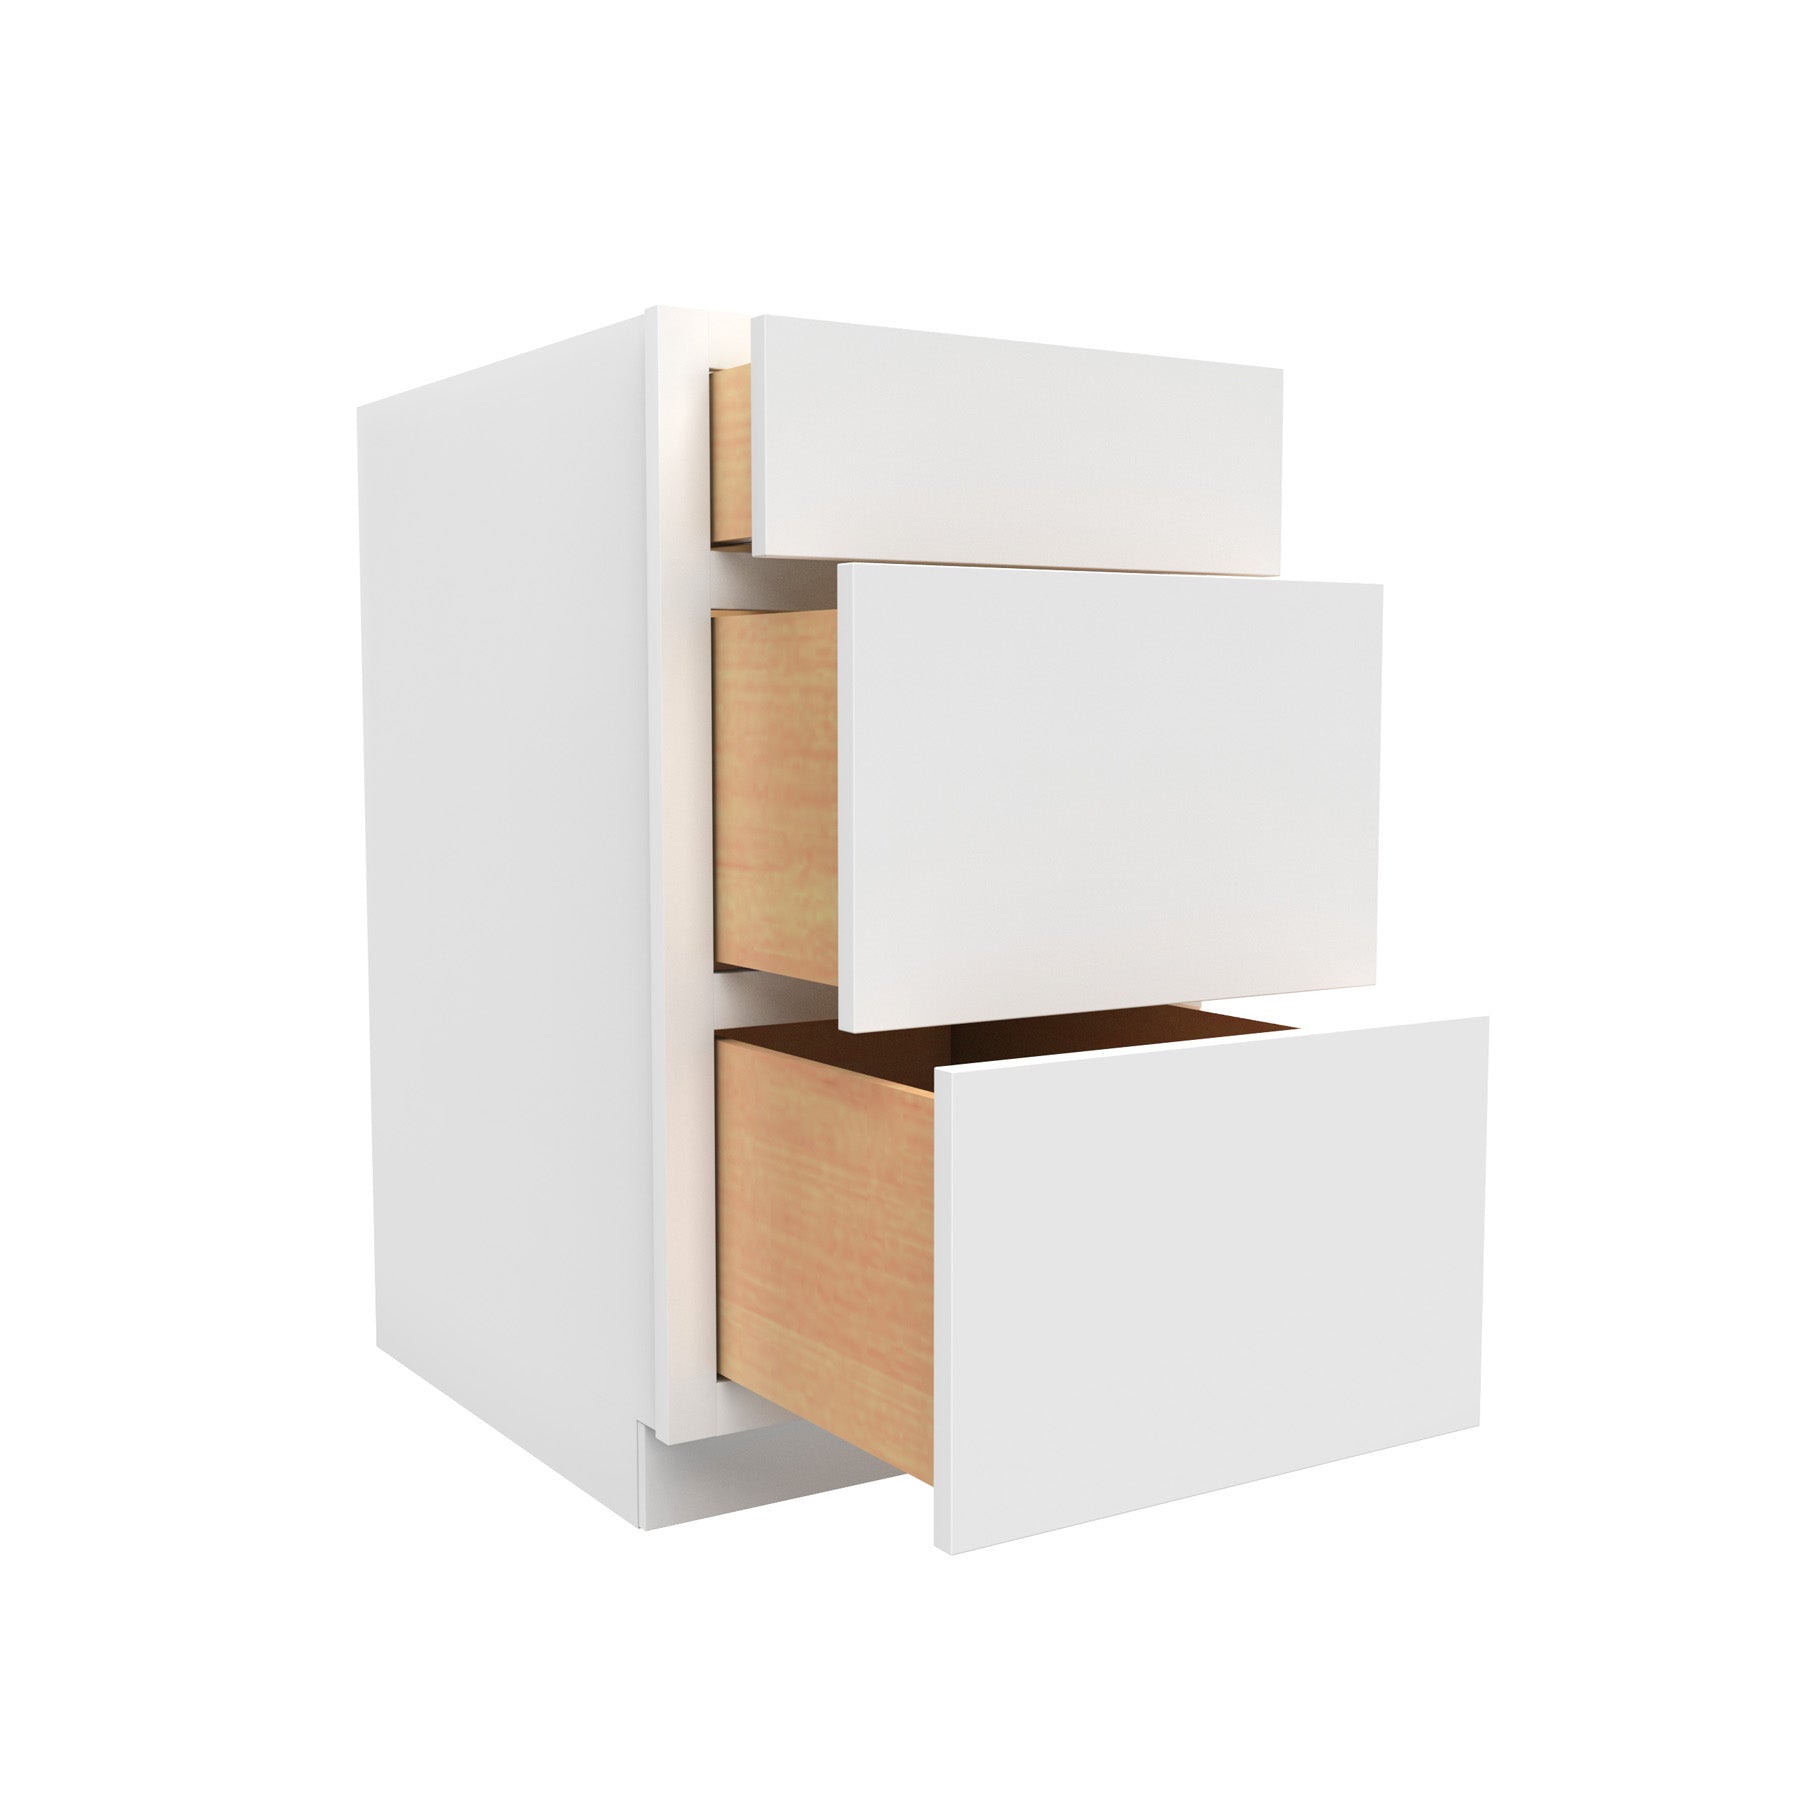 18 Inch Wide Accessible ADA - 3 Drawer Base Cabinet - Luxor White Shaker - Ready To Assemble, 18"W x 32.5"H x 24"D